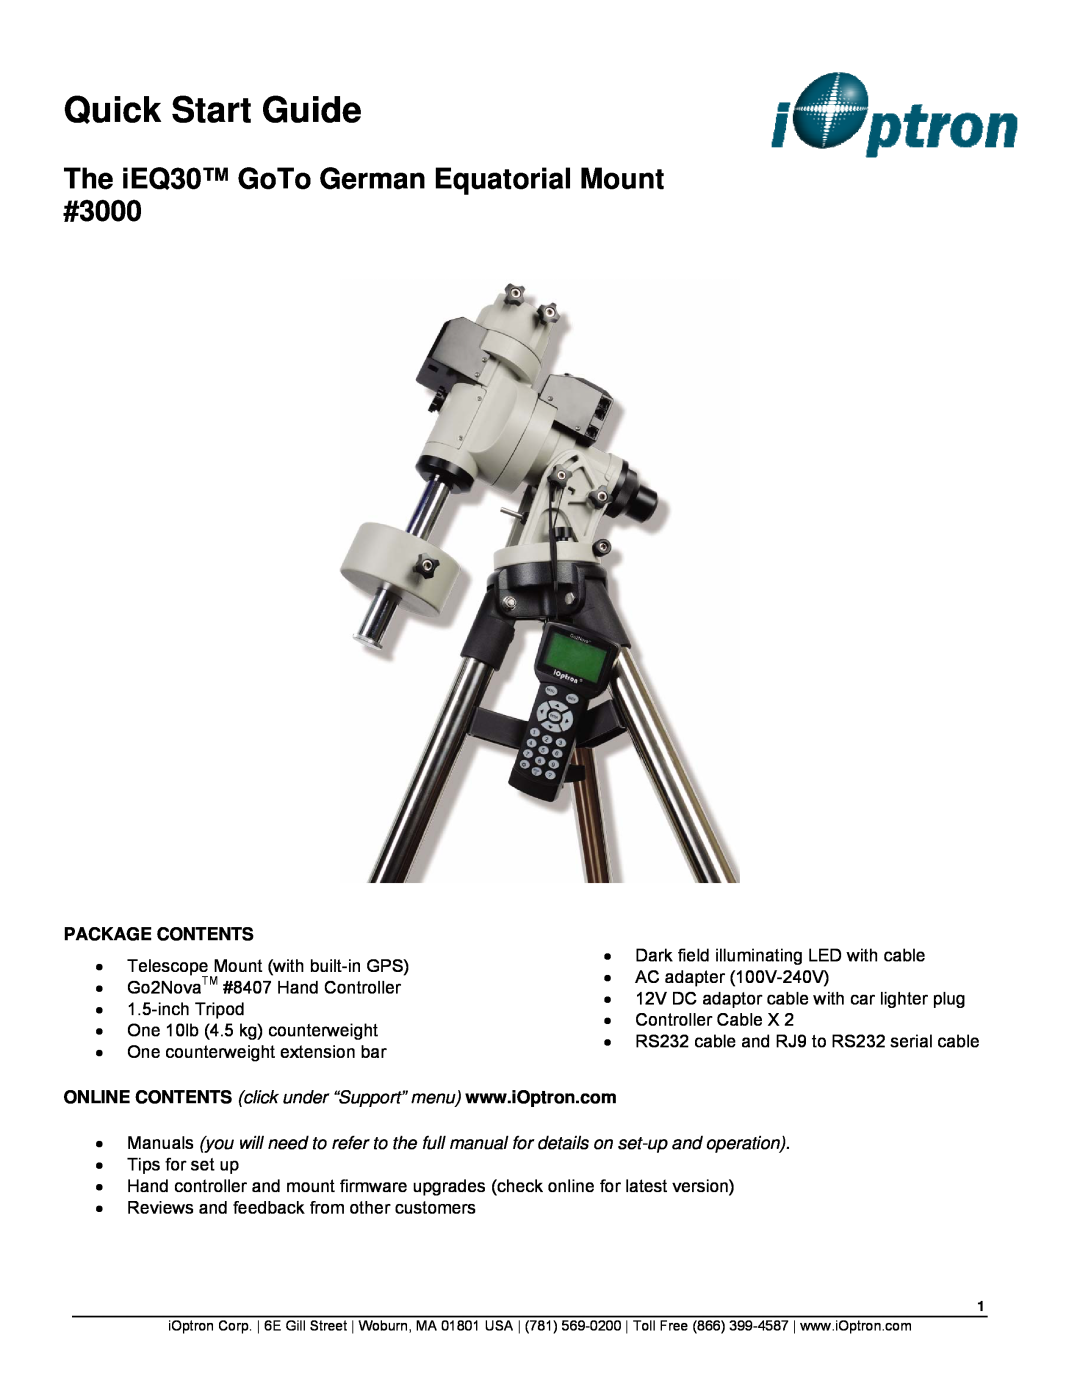 iOptron IEQ30 quick start Package Contents, Quick Start Guide, The iEQ30 GoTo German Equatorial Mount #3000 